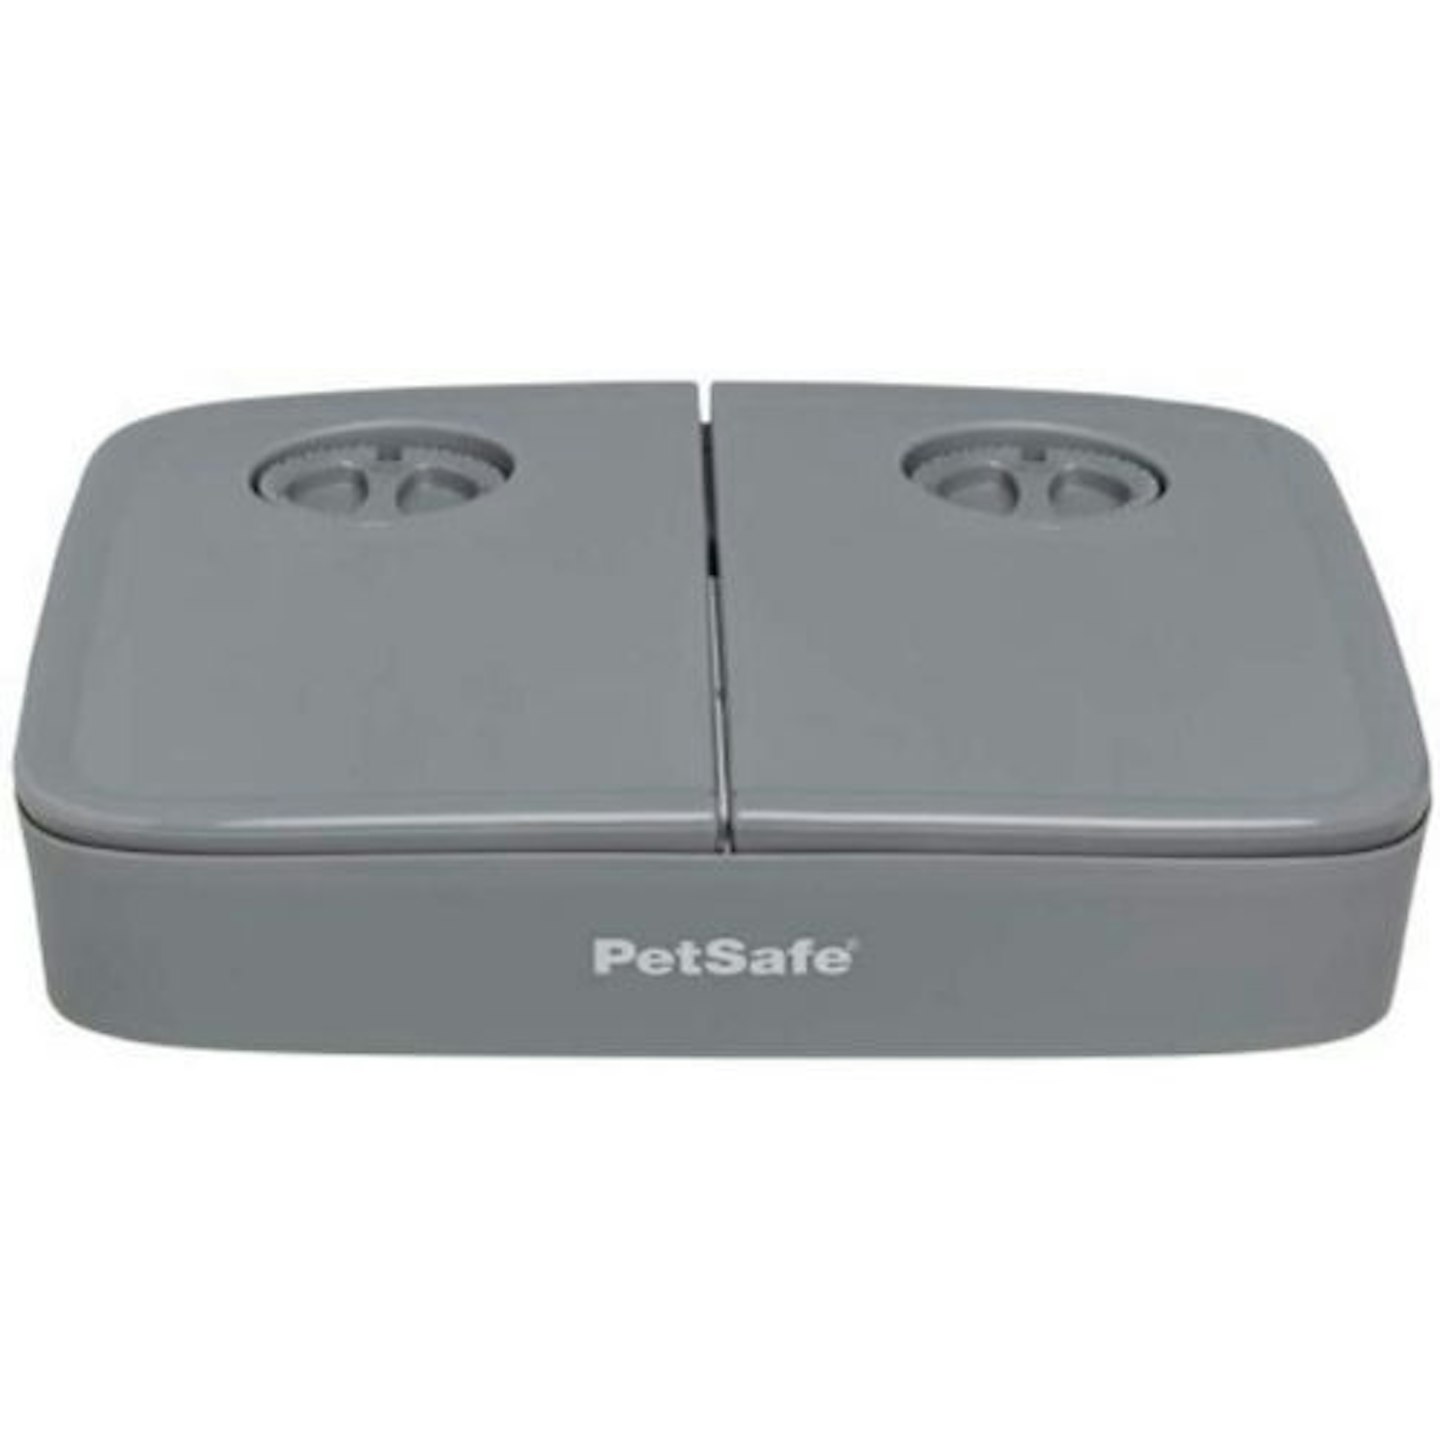 PetSafe 2 Meal Automatic Feeder